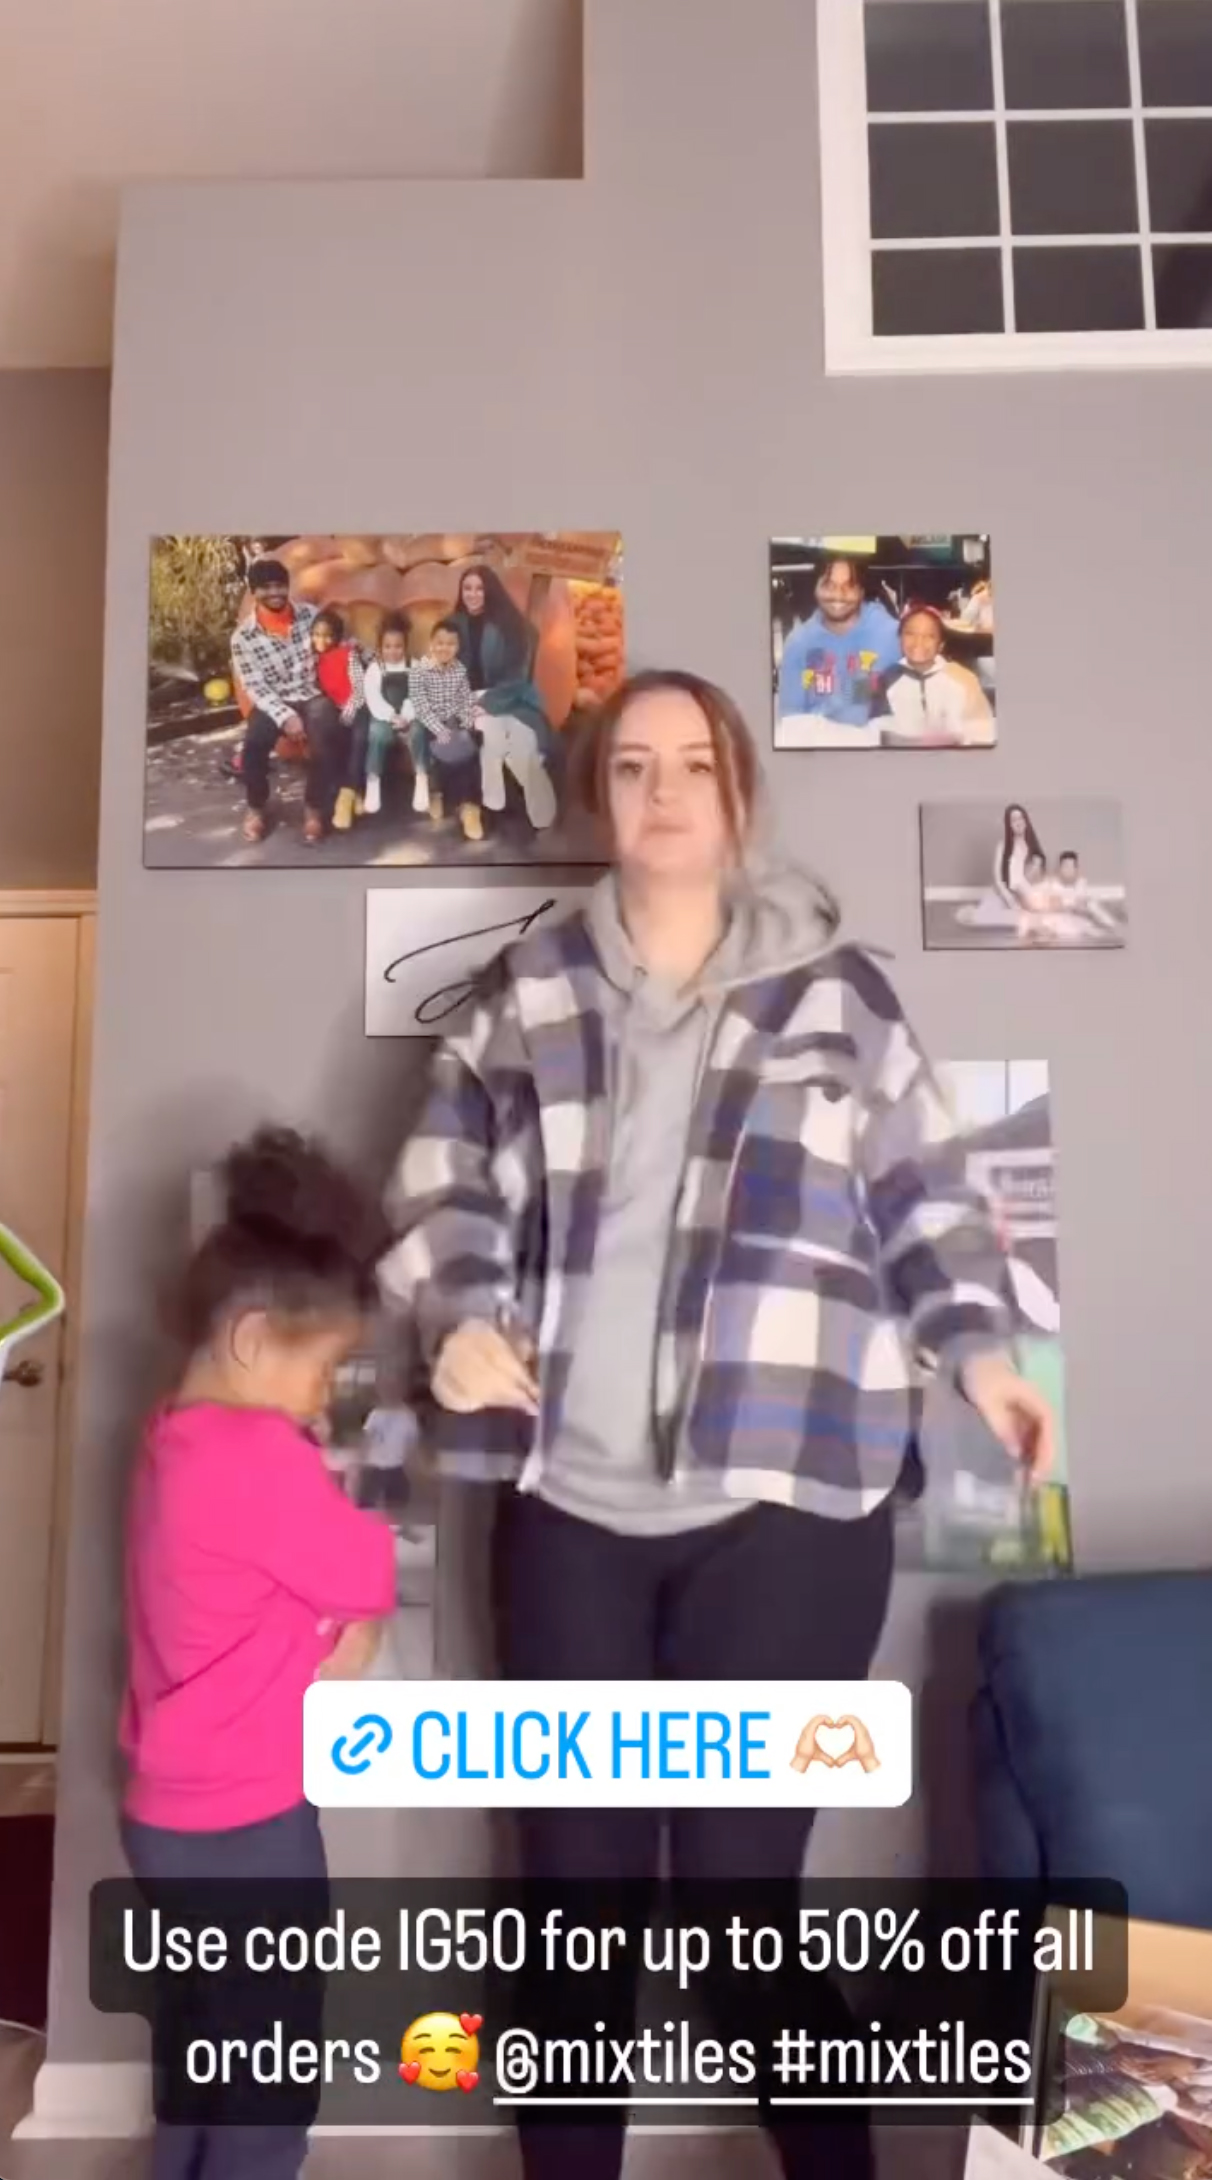 Daughter Ariah appeared with Kayla in a new video